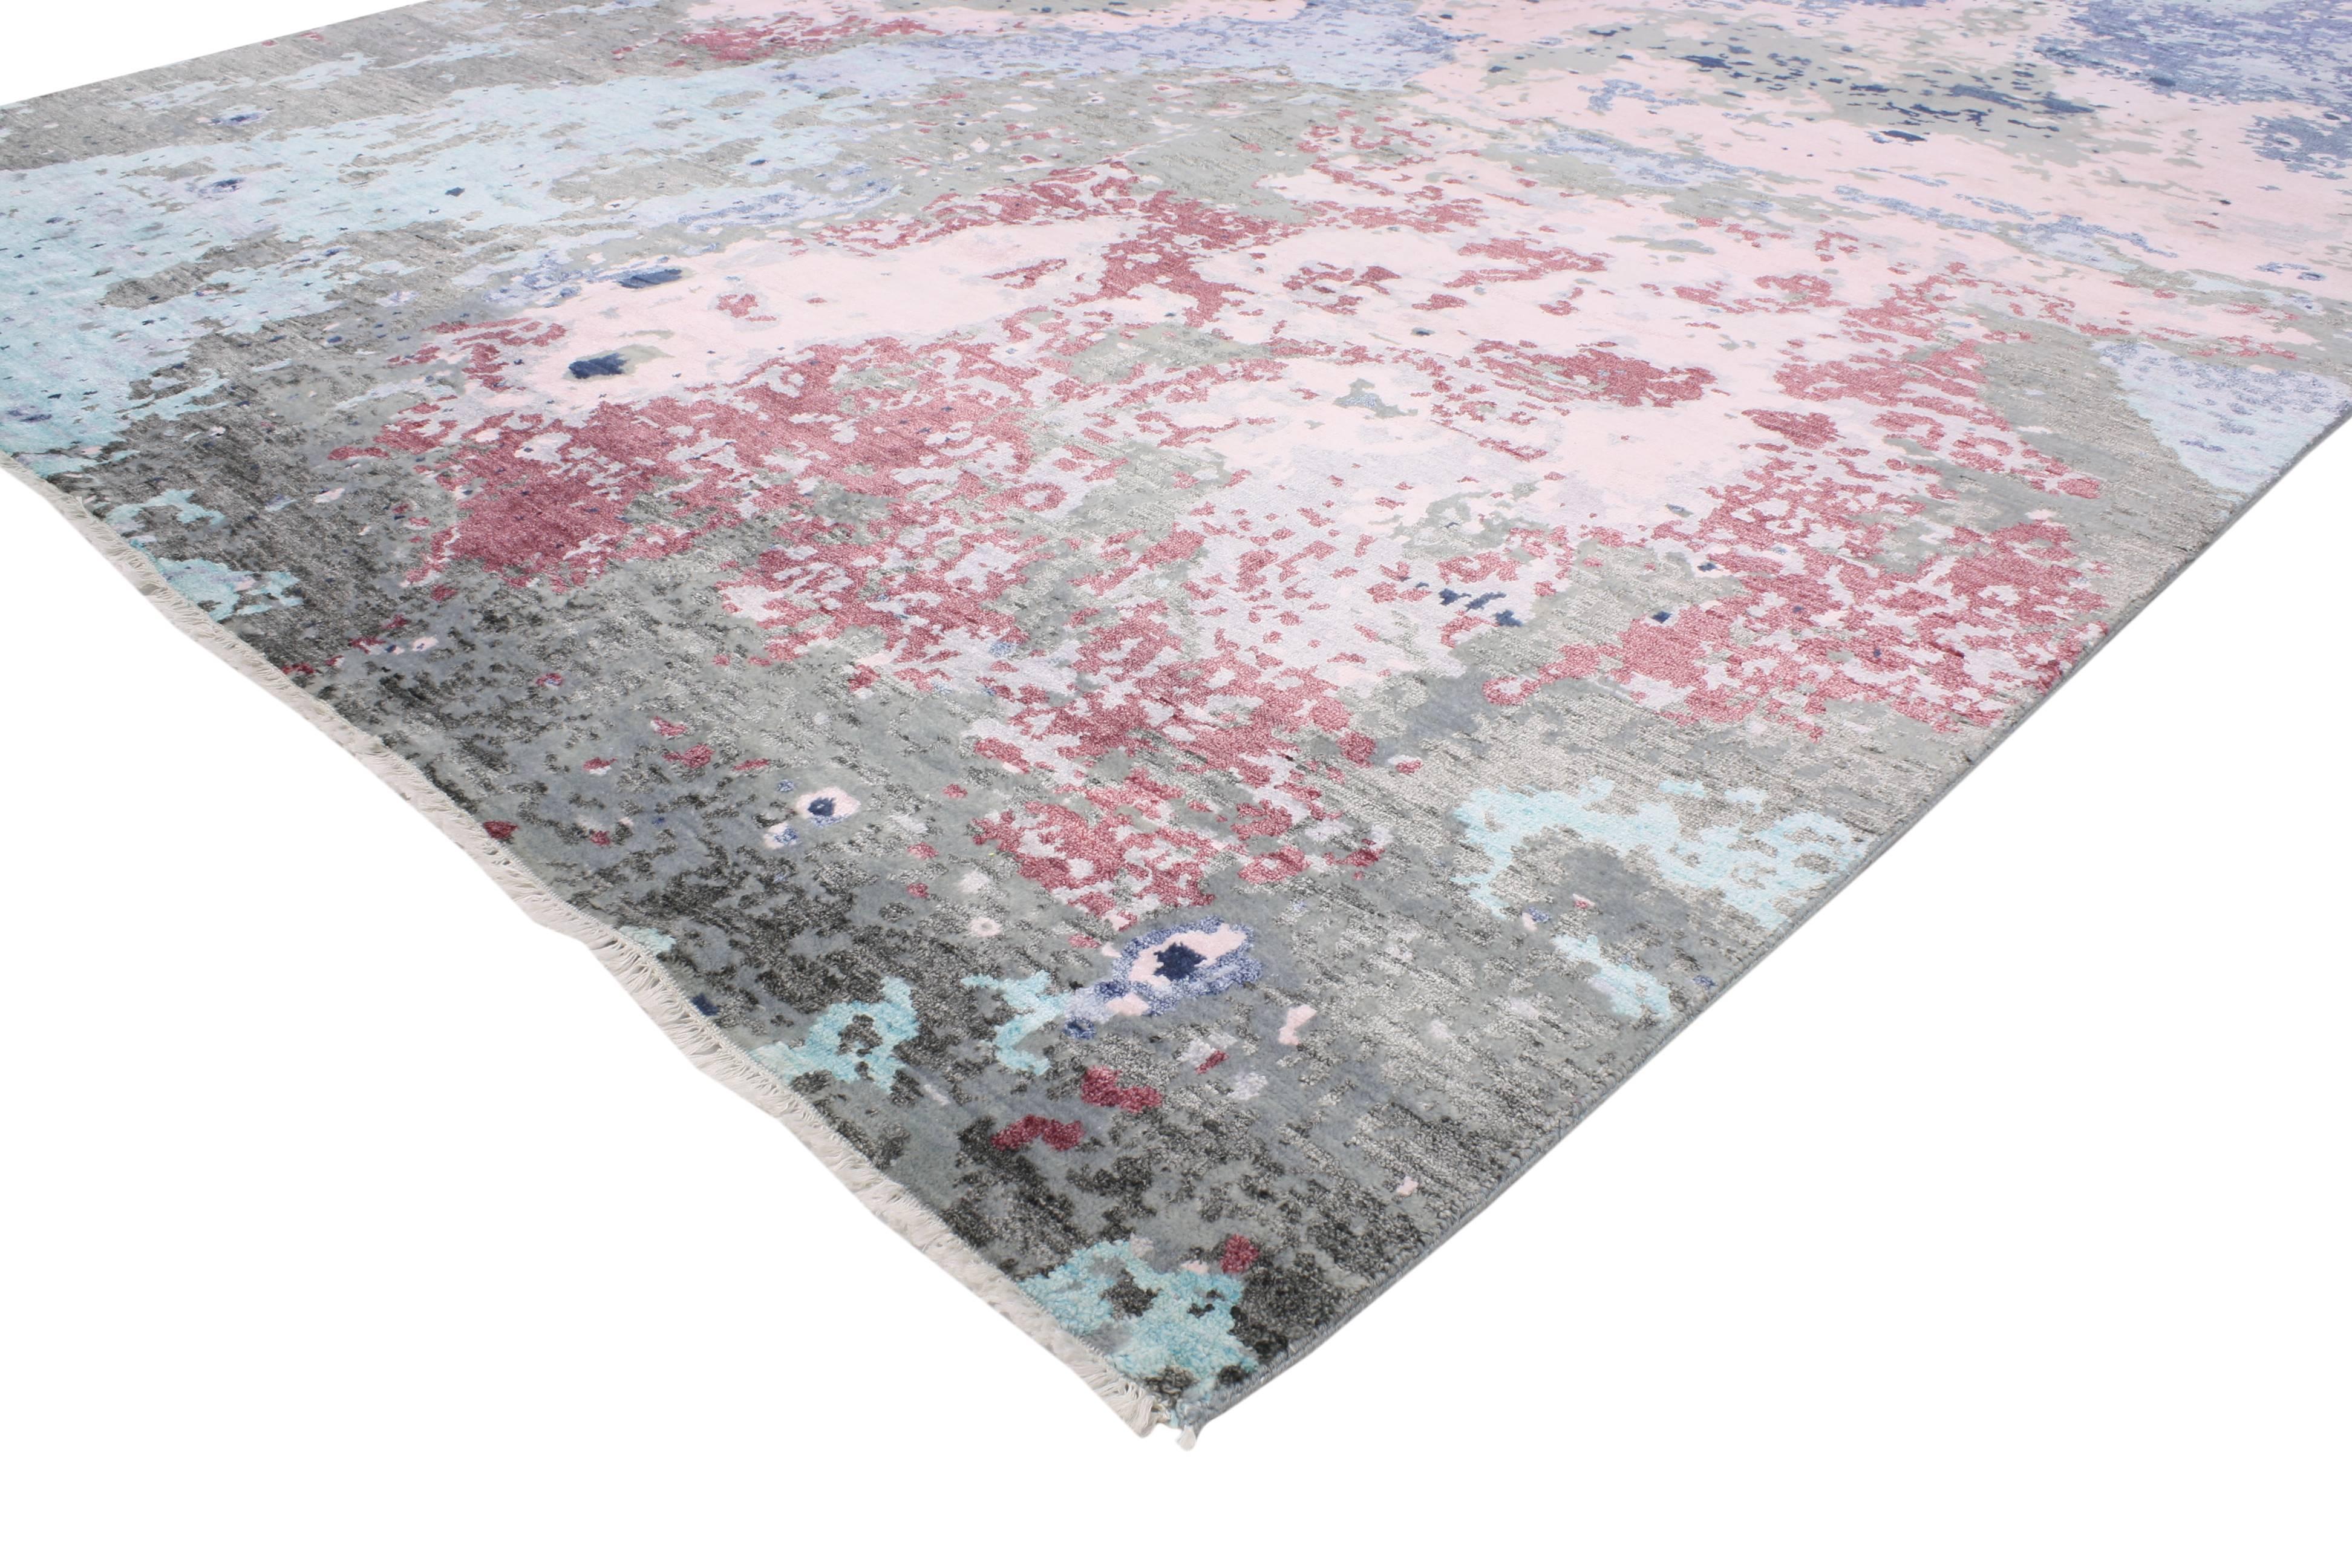 30335 New Contemporary Abstract Area Rug with Post-Modern Expressionist Memphis Stylee, 08'00 x 12'00. This hand-knotted silk contemporary abstract area rug with post-modern Memphis style goes beyond the boundaries of design. This contemporary rug